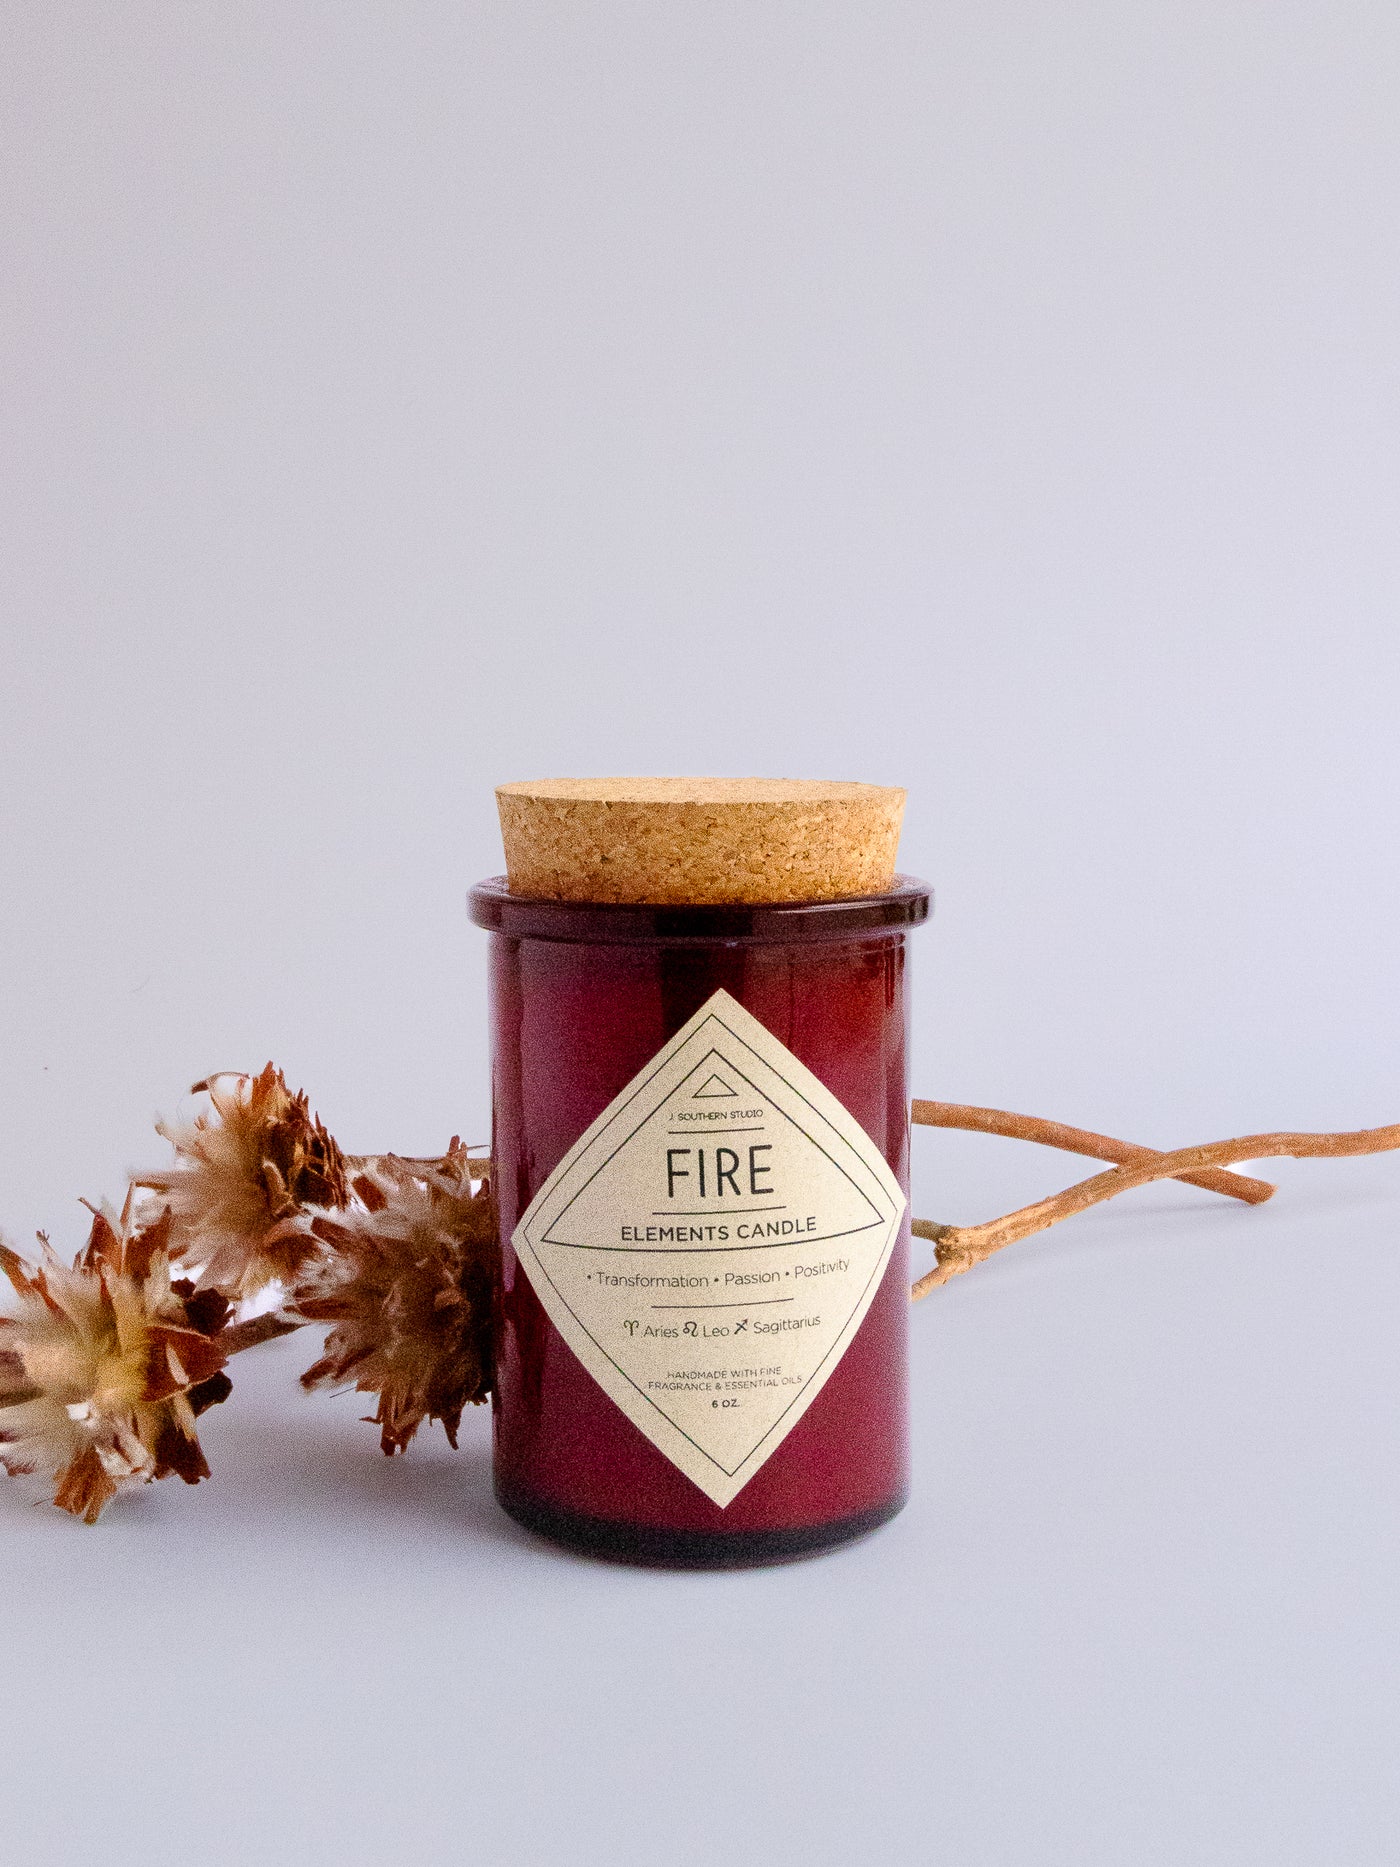 Fire Element Candle with tobacco, allspice, black pepper, cedarwood.